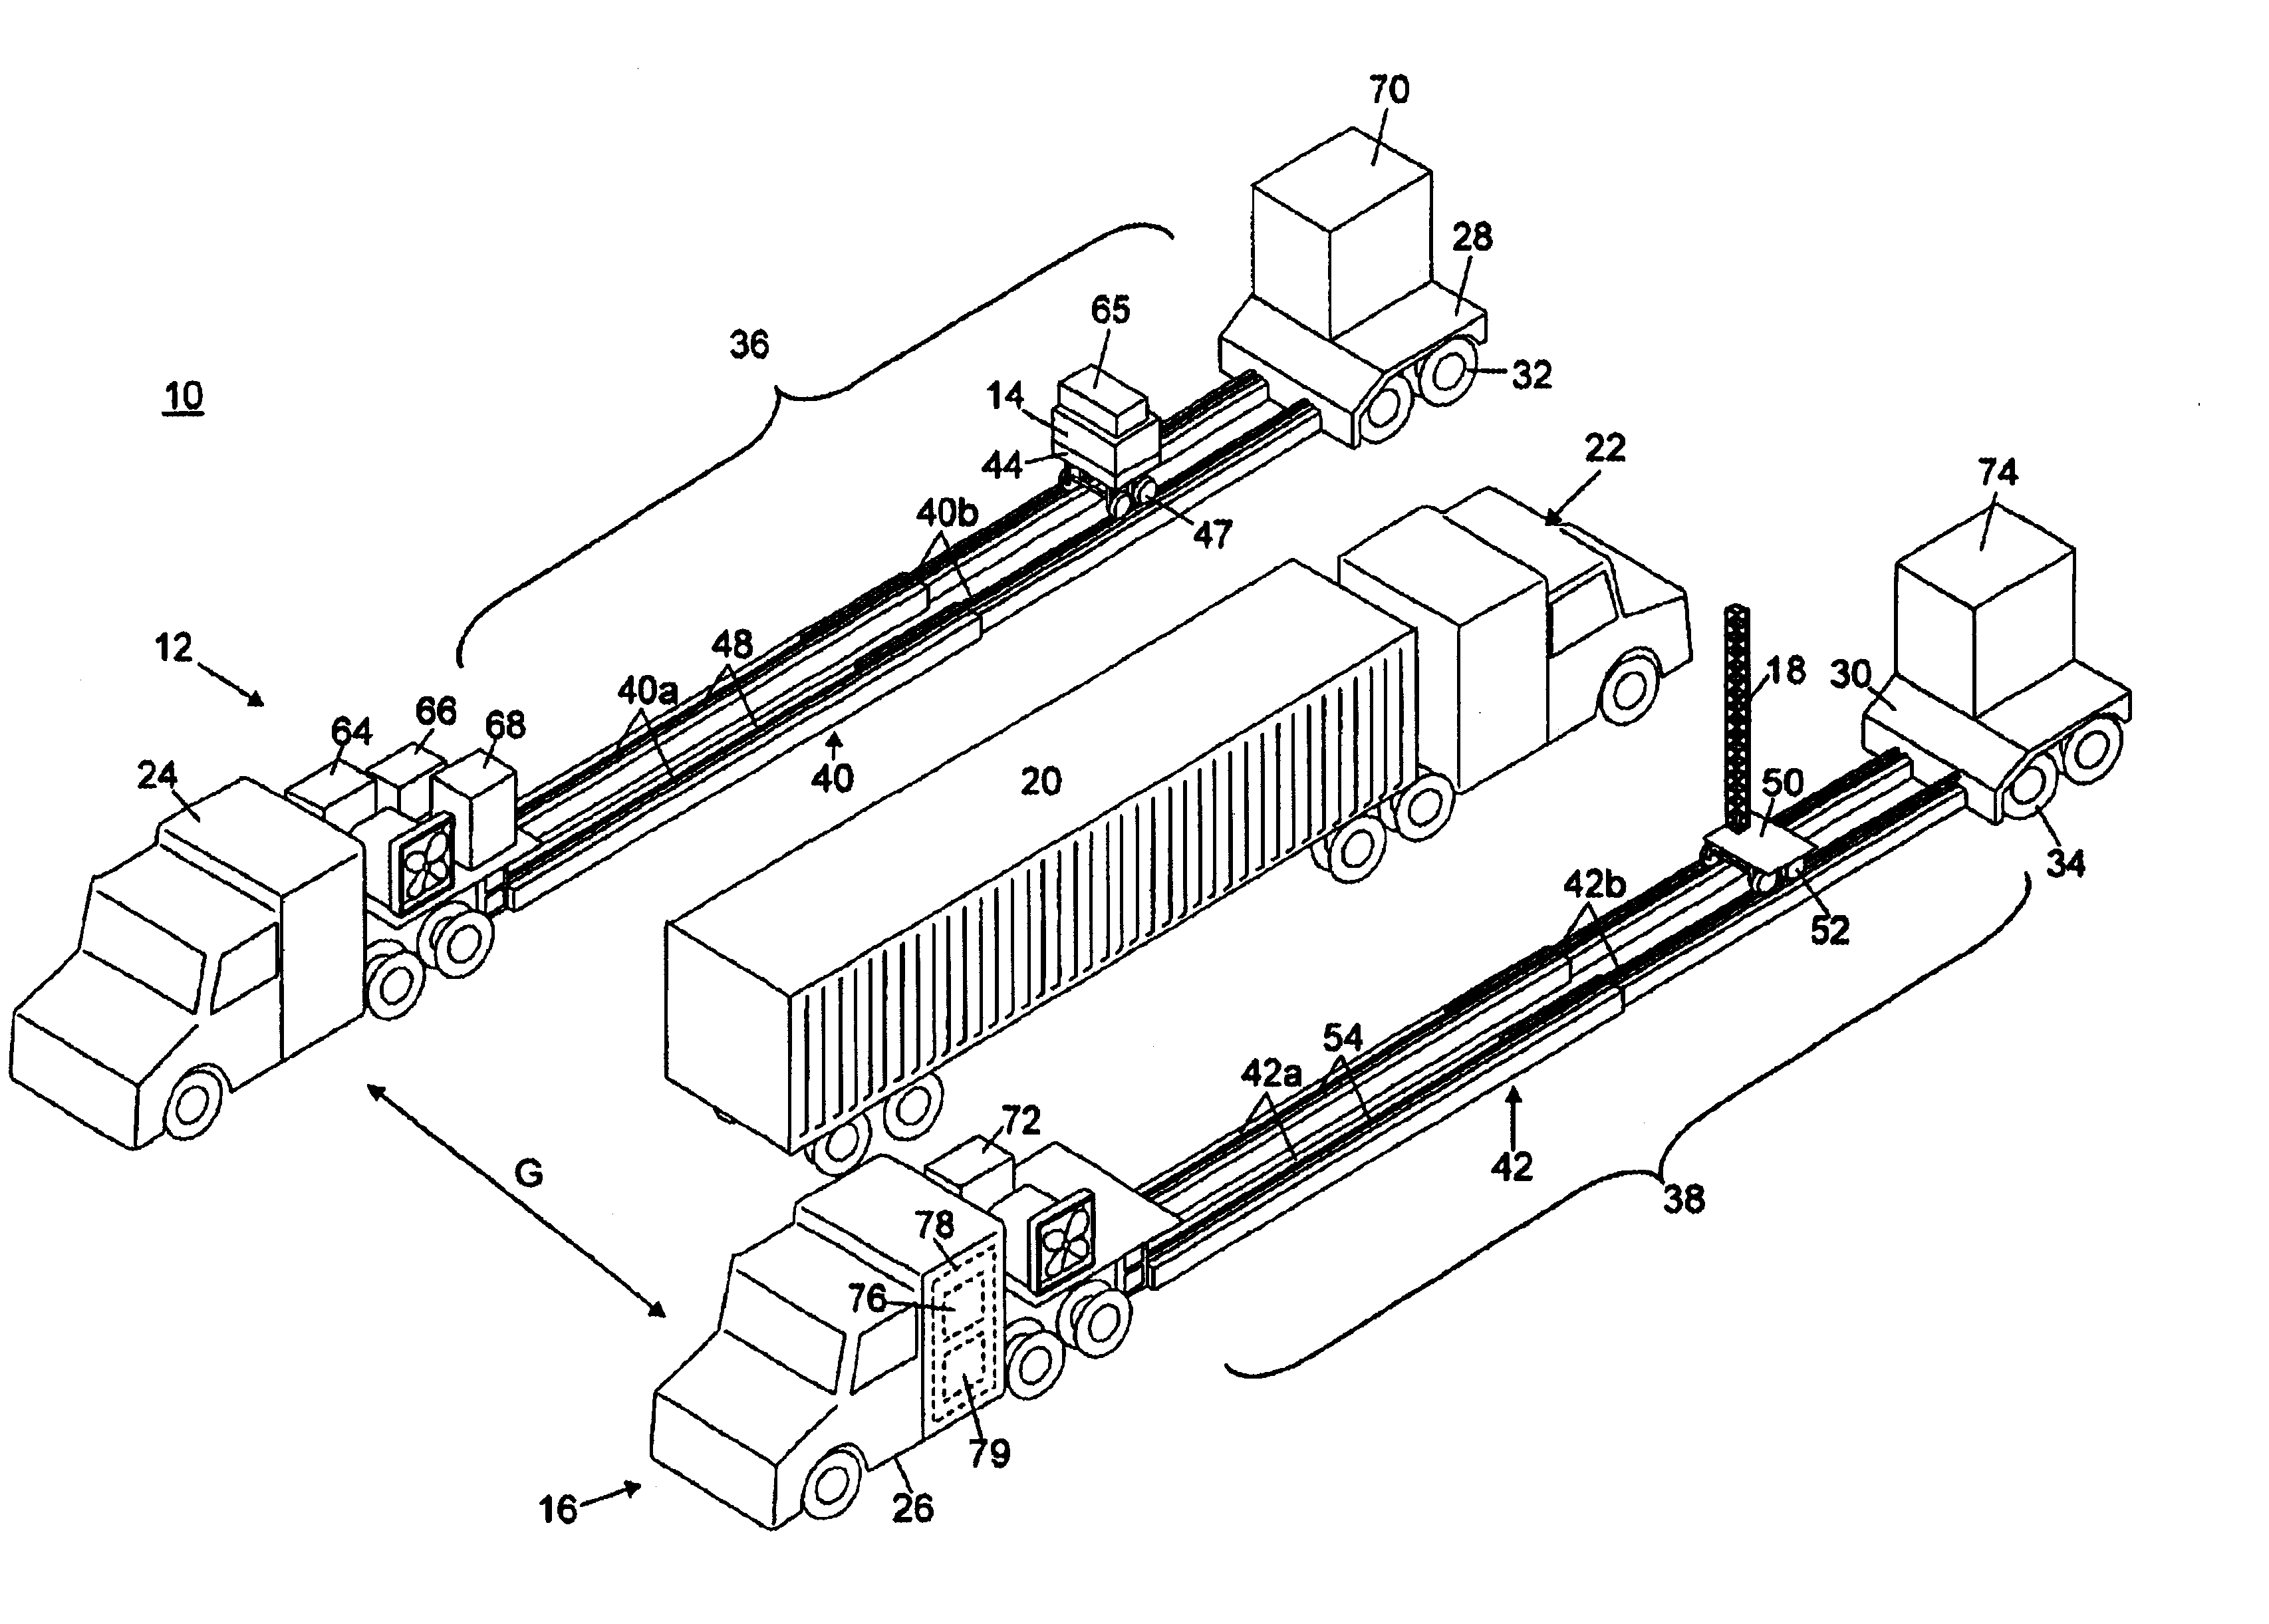 Vehicle mounted inspection systems and methods